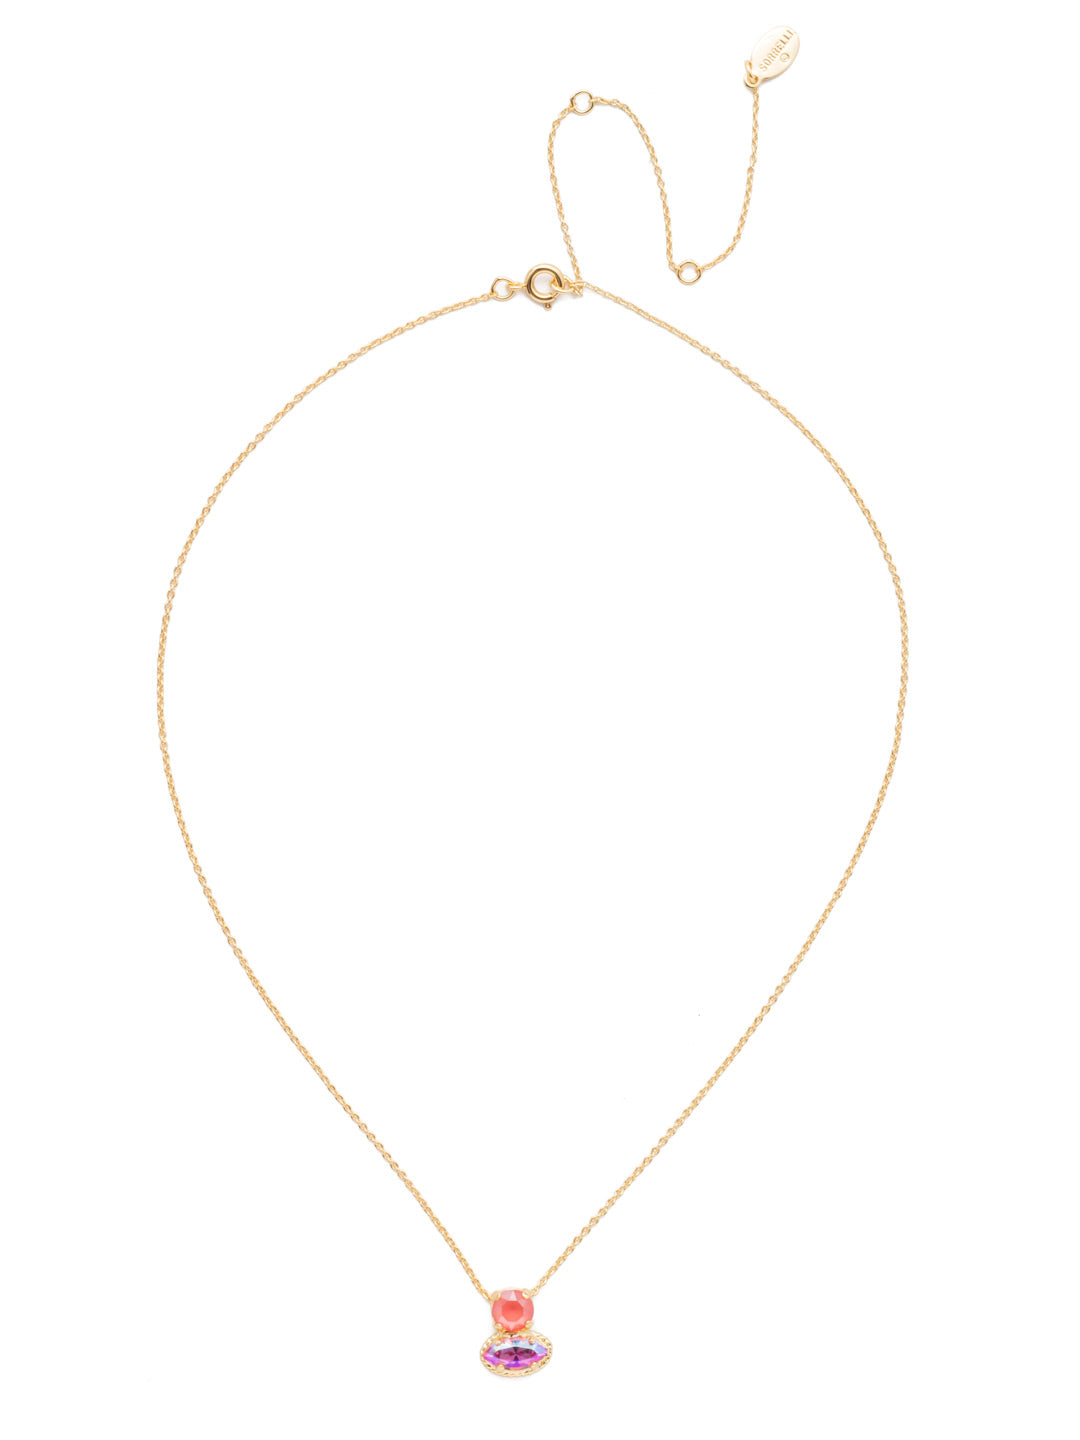 Mirasol Pendant Necklace - NES16BGBGA - Understated and elegant is the Mirasol Pendant Necklace. Another wardrobe staple, put it on with any outfit and let its sparkling crystals do the talking. From Sorrelli's Begonia collection in our Bright Gold-tone finish.